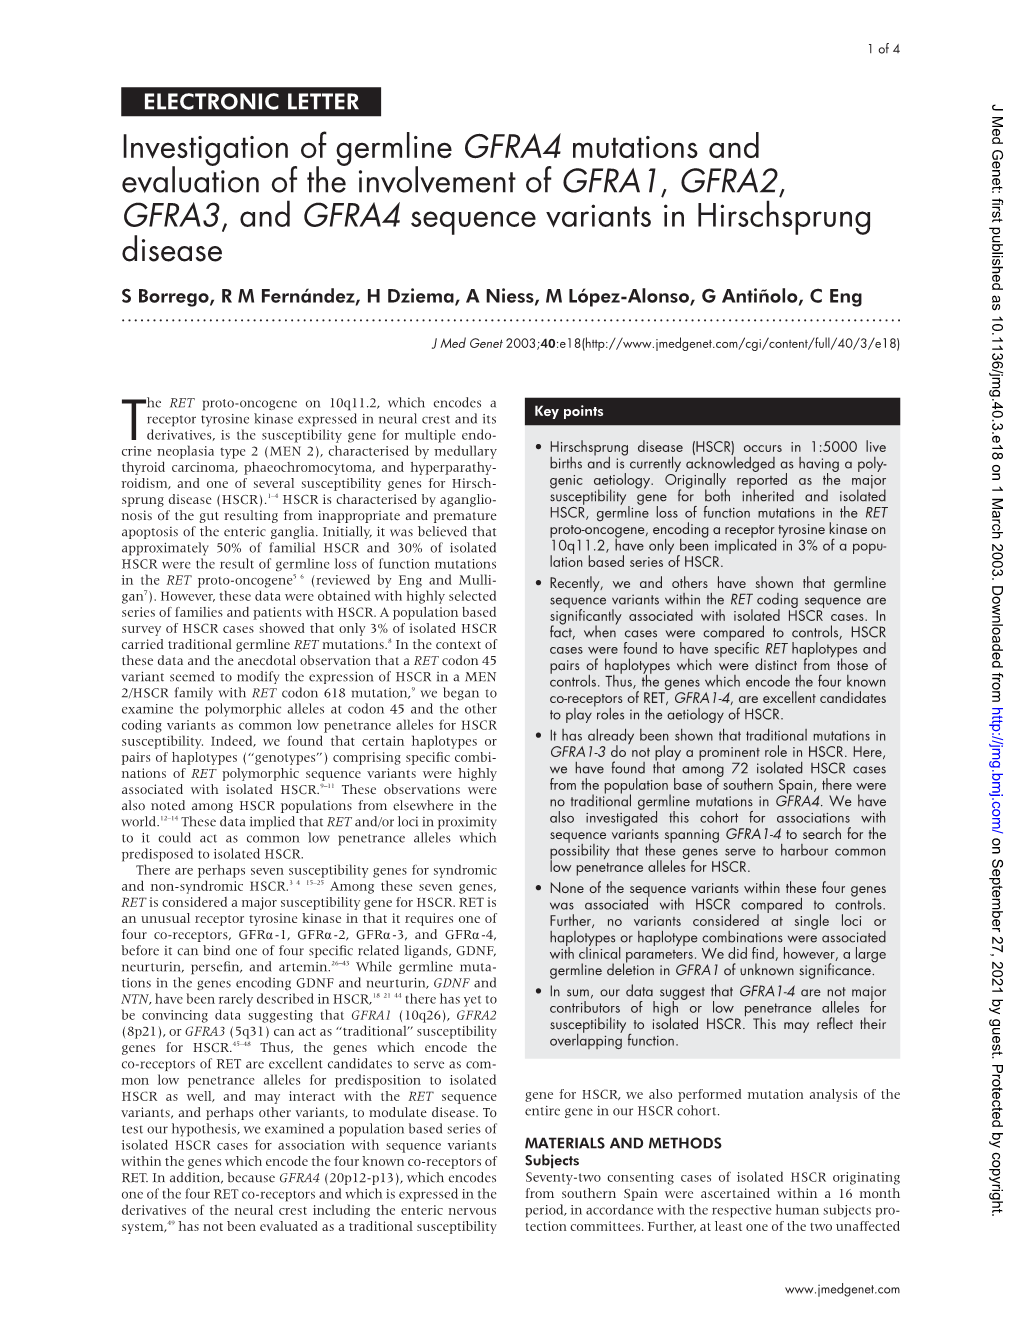 Investigation of Germline GFRA4 Mutations and Evaluation of The